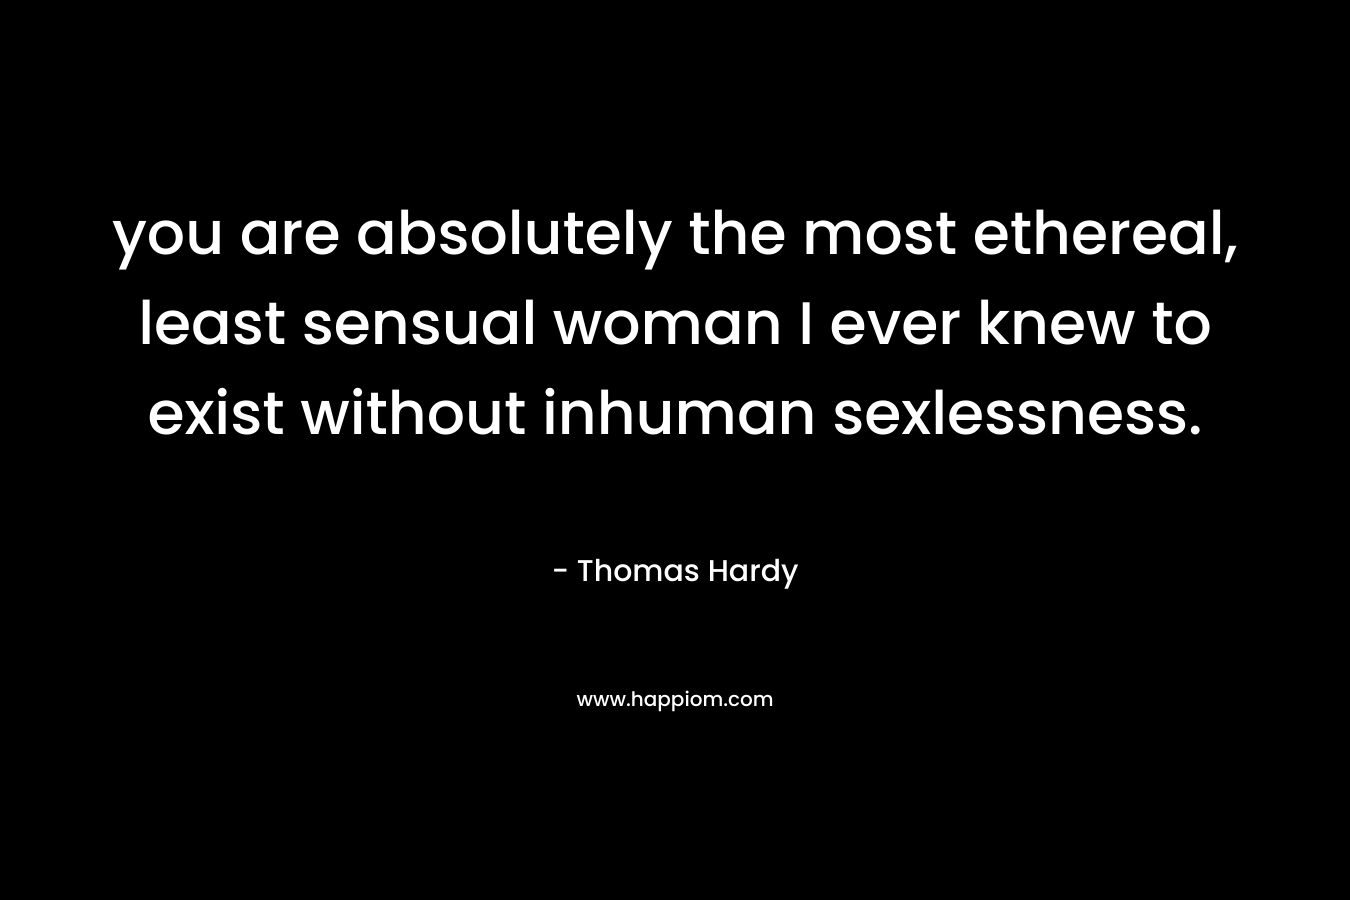 you are absolutely the most ethereal, least sensual woman I ever knew to exist without inhuman sexlessness. – Thomas Hardy